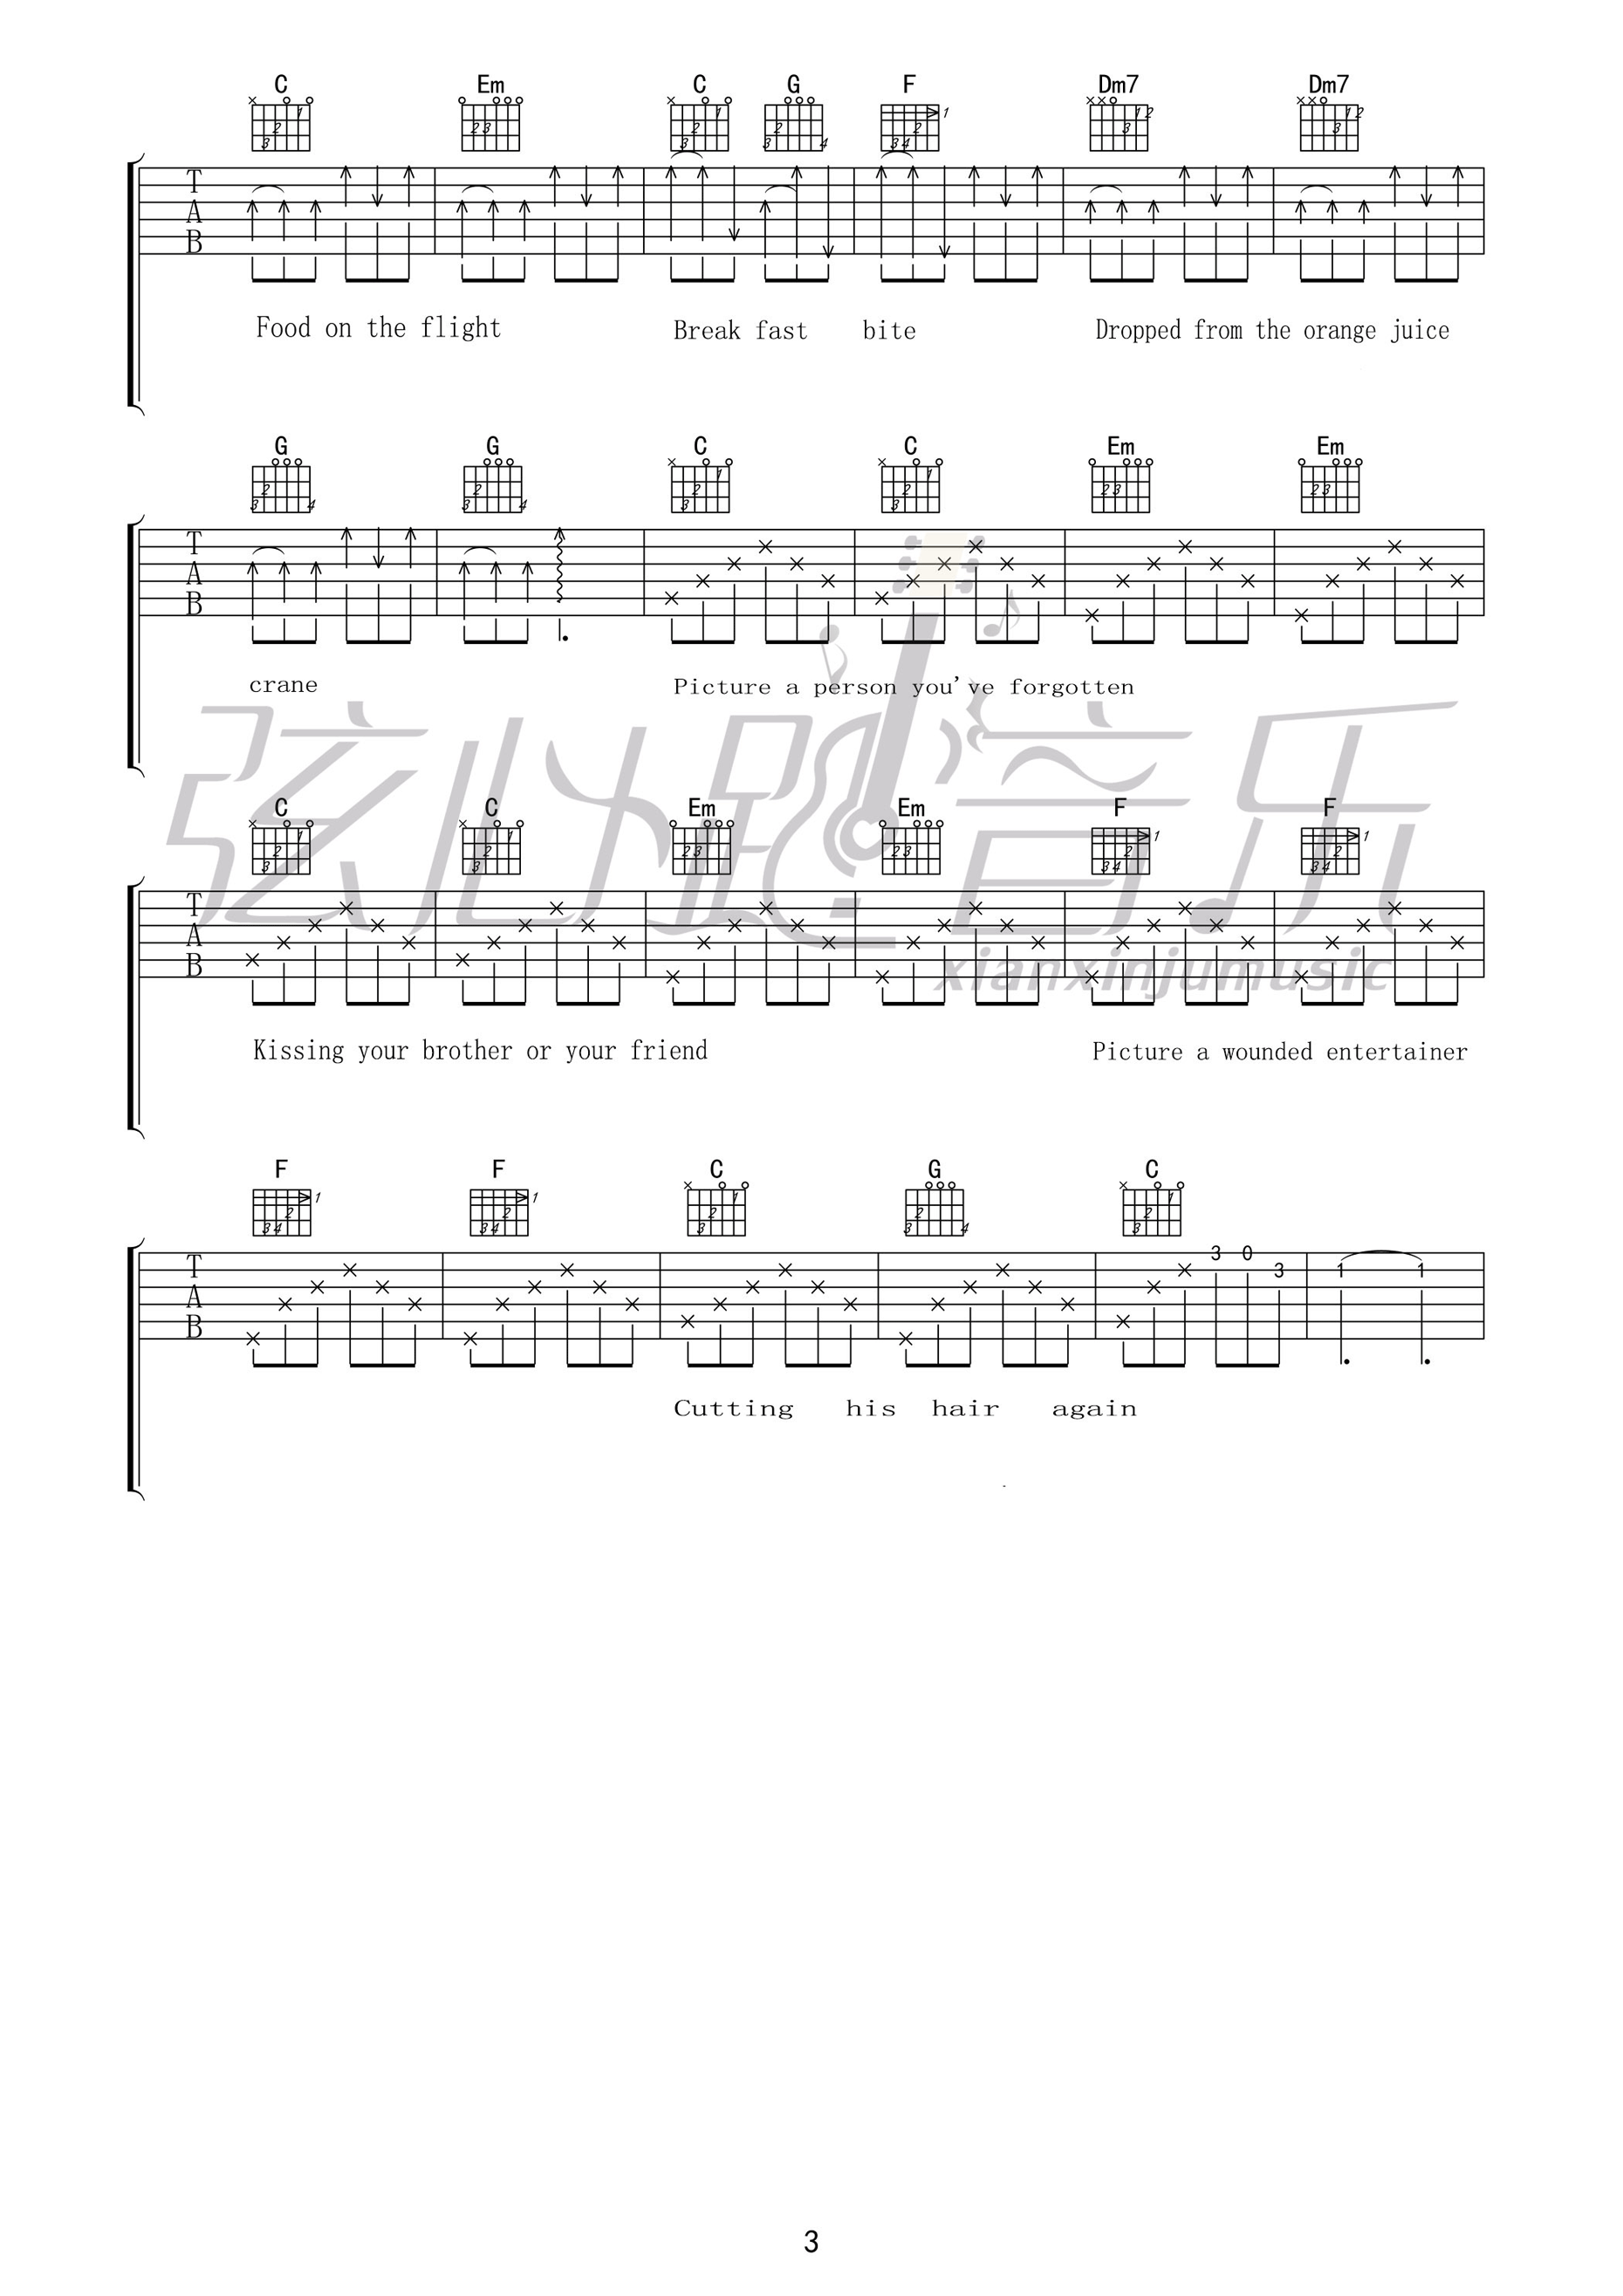 Adam,Green_We’re_Not_Supposed_to_Be_Lovers_吉他谱_Guitar_Music_Score